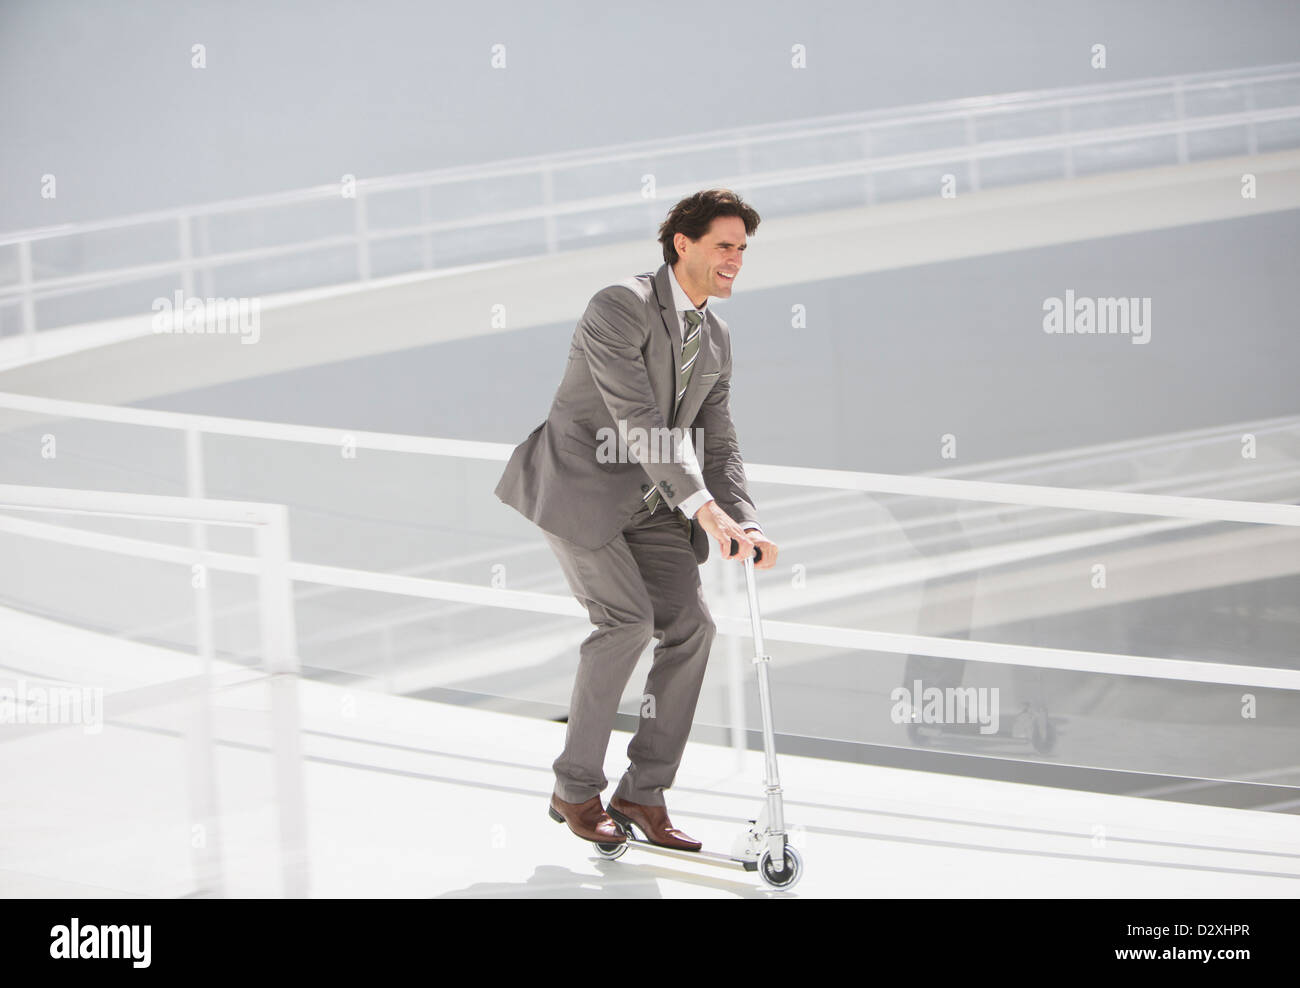 Businessman riding scooter down walkway Stock Photo